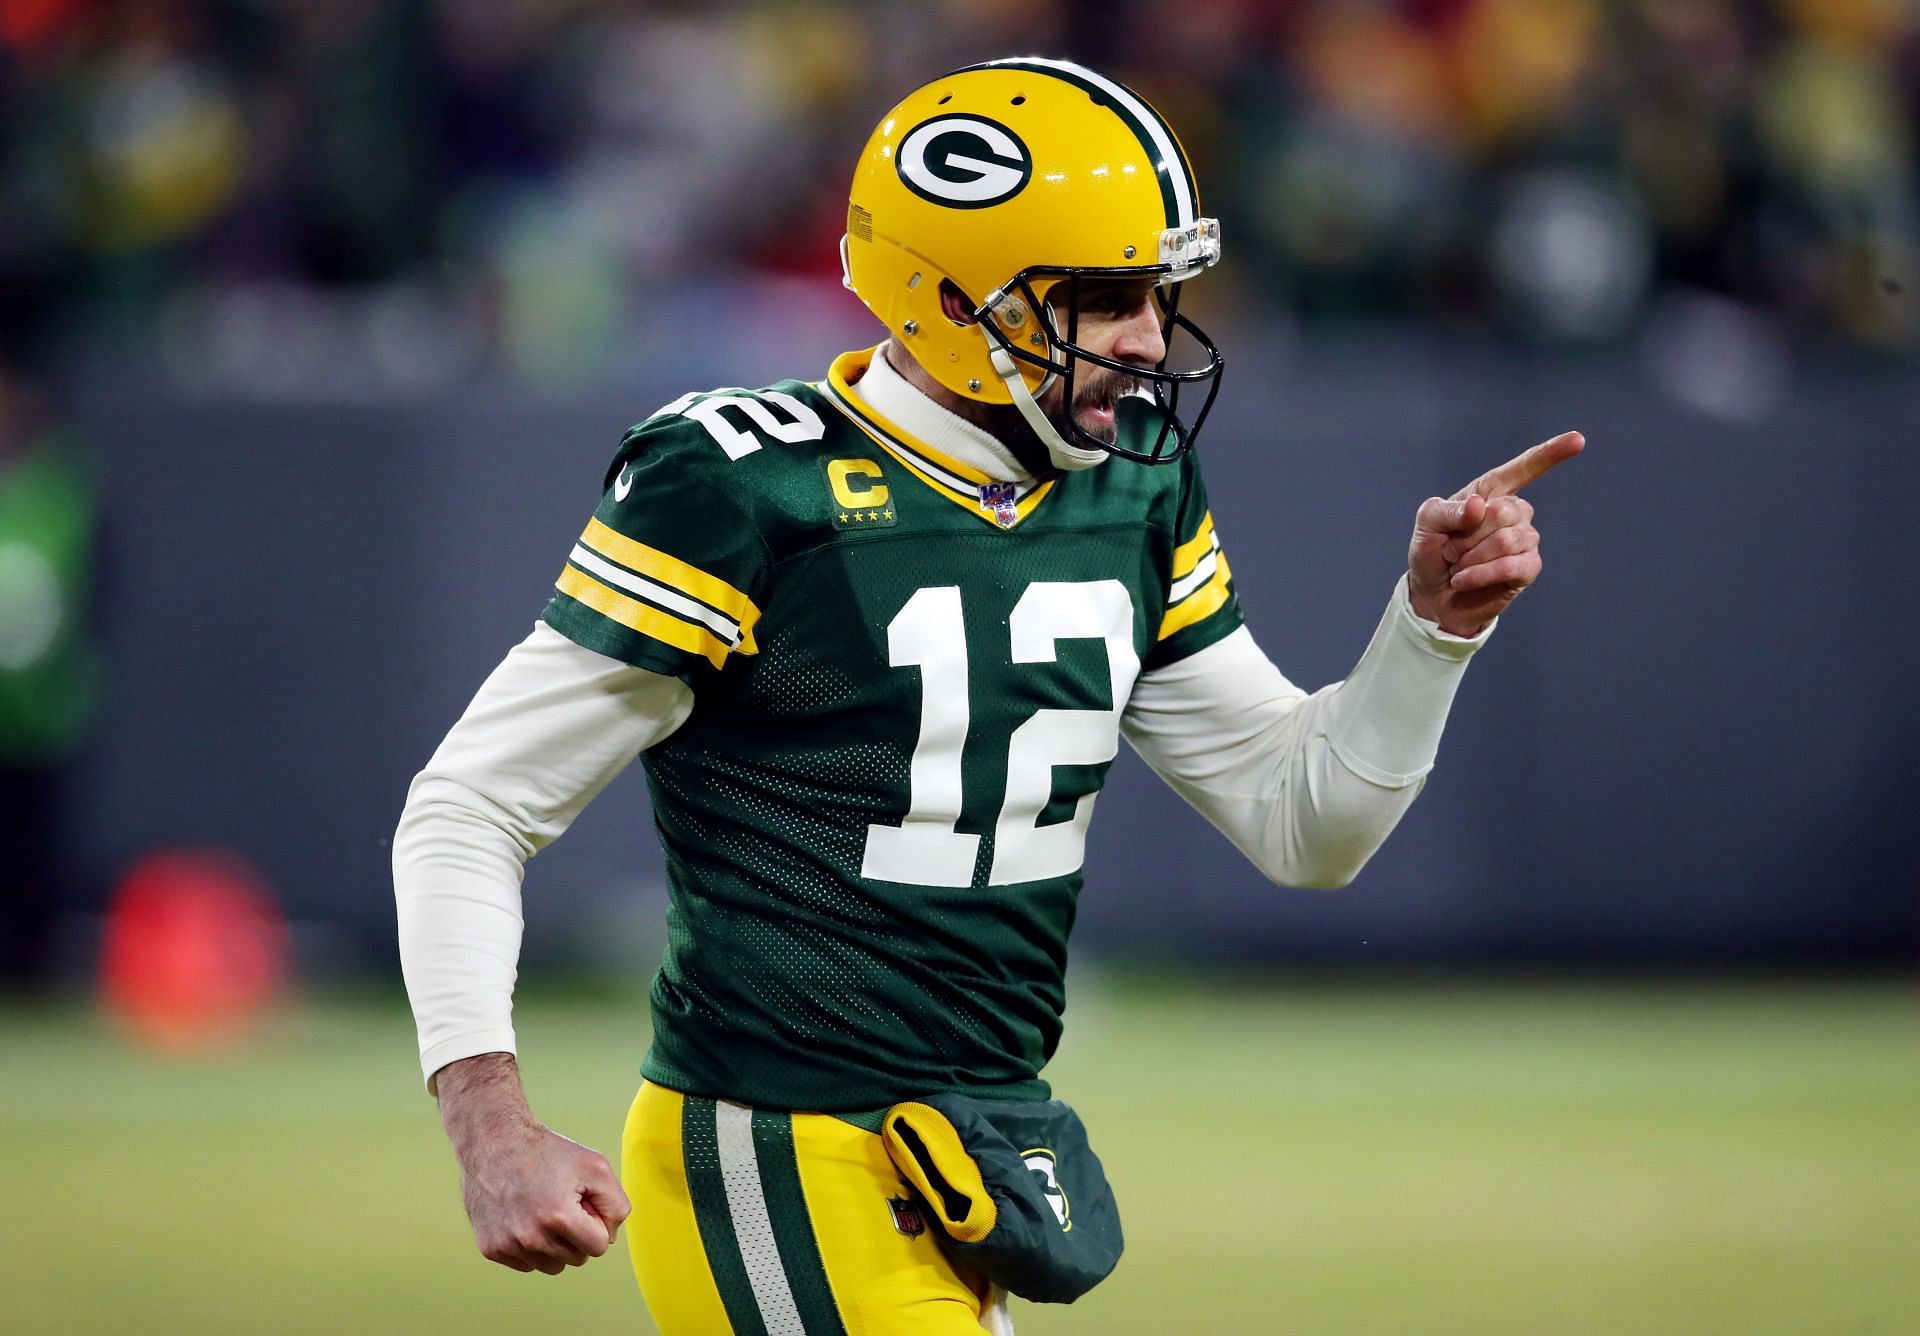 Green Bay Packers quarterback Aaron Rodgers returns for another season with the team.